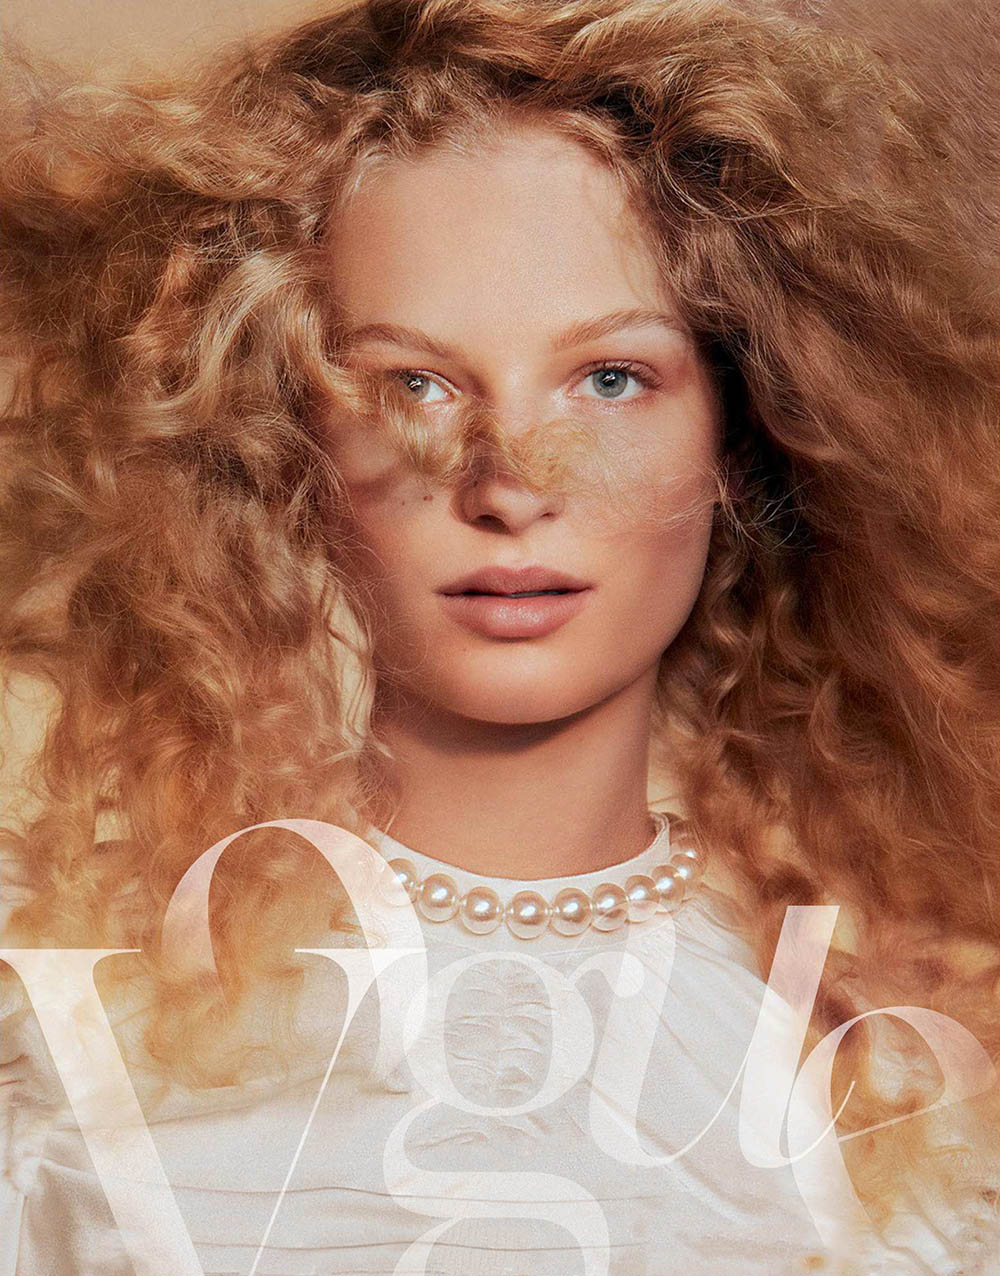 Frederikke Sofie covers Vogue Russia May 2018 by Txema Yeste